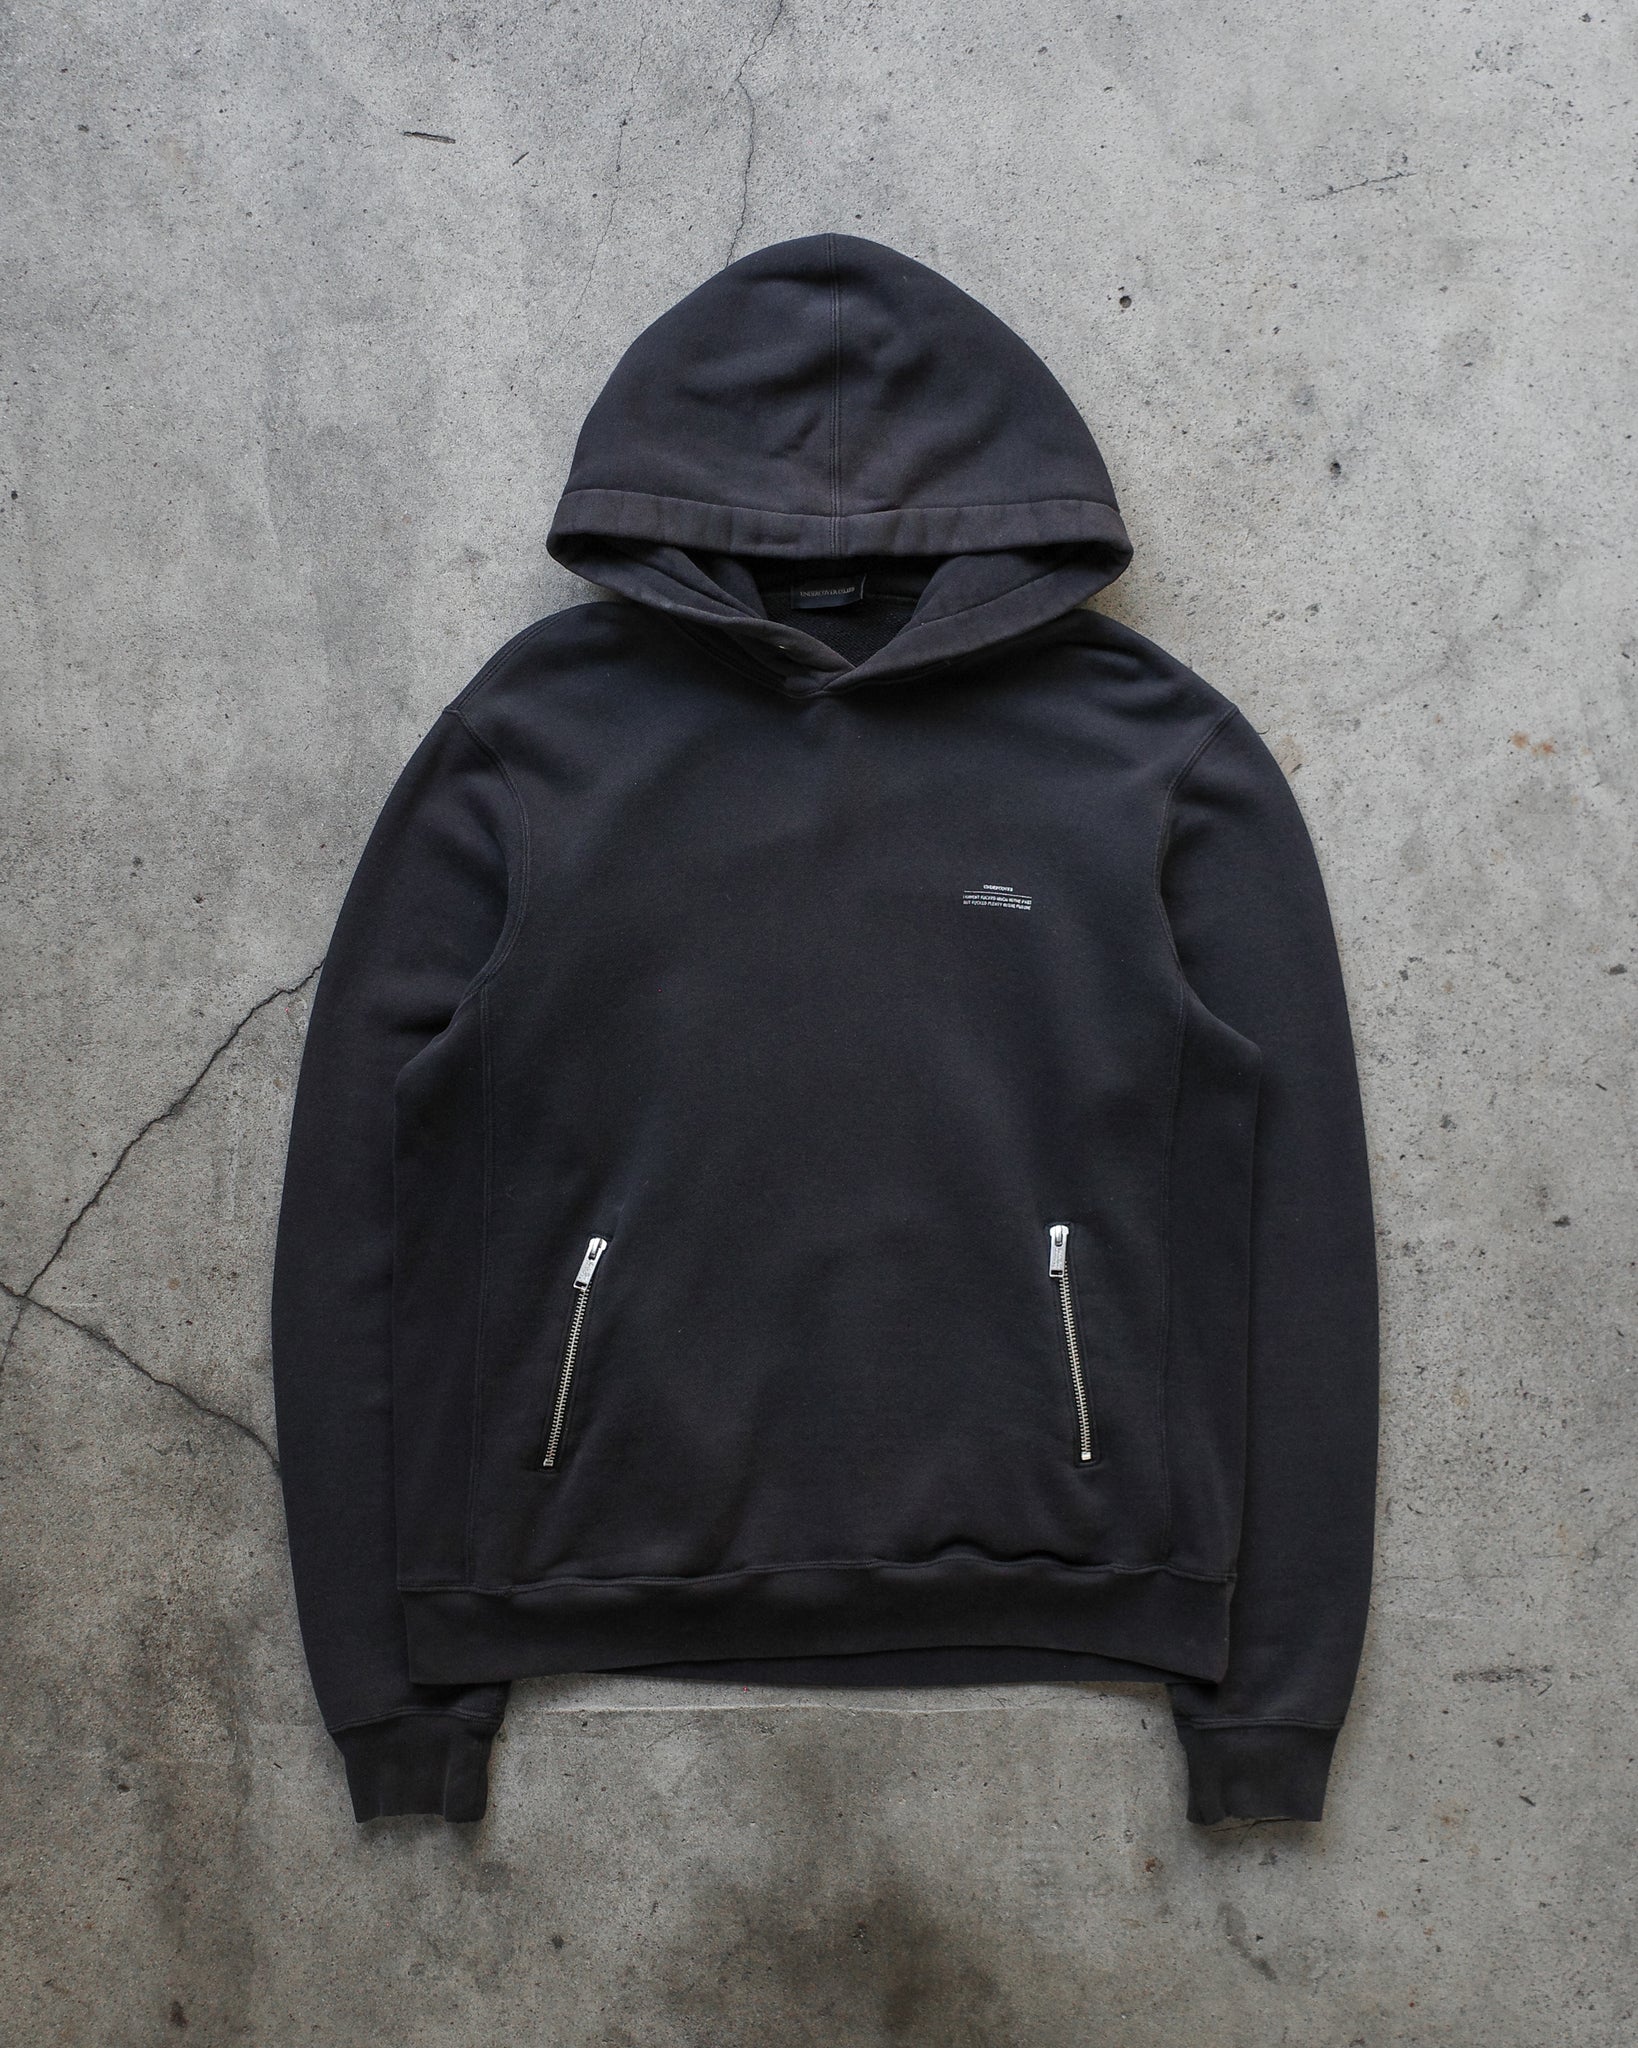 Undercover FW16 "I Haven't Fucked Much..." Hoodie